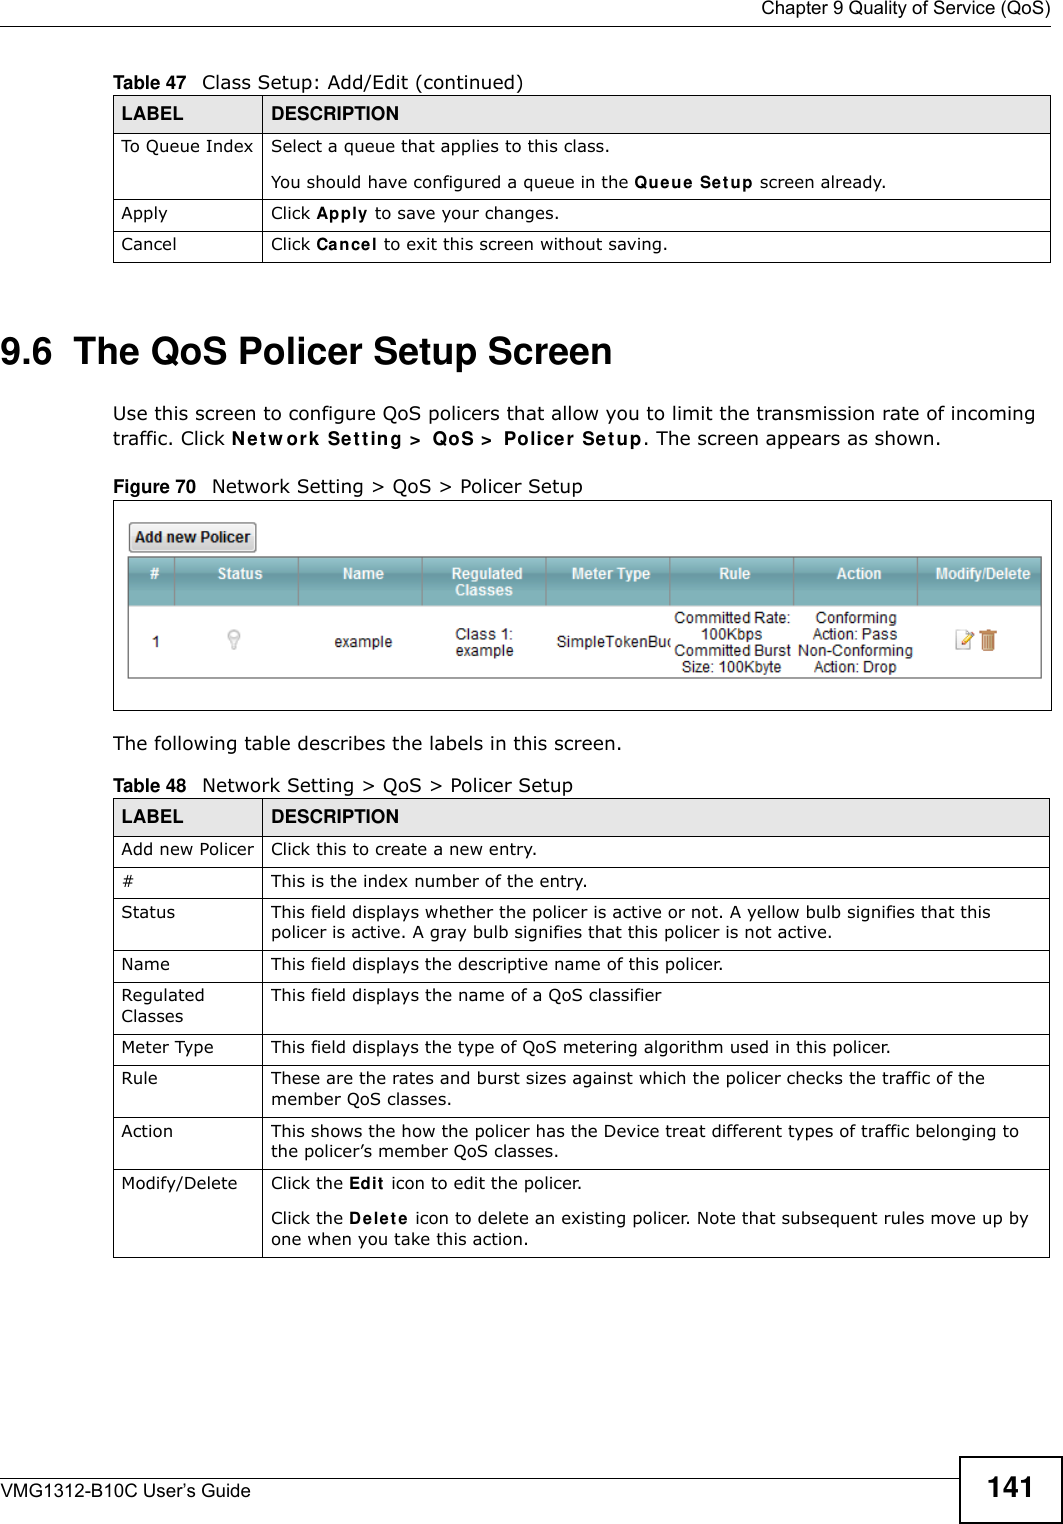  Chapter 9 Quality of Service (QoS)VMG1312-B10C User’s Guide 1419.6  The QoS Policer Setup ScreenUse this screen to configure QoS policers that allow you to limit the transmission rate of incoming traffic. Click N et w ork  Set ting &gt;  QoS &gt;  Policer Se t u p. The screen appears as shown. Figure 70   Network Setting &gt; QoS &gt; Policer Setup The following table describes the labels in this screen.  To Queue Index Select a queue that applies to this class.You should have configured a queue in the Que u e  Se t up screen already.Apply Click Apply to save your changes.Cancel Click Cance l to exit this screen without saving.Table 47   Class Setup: Add/Edit (continued)LABEL DESCRIPTIONTable 48   Network Setting &gt; QoS &gt; Policer SetupLABEL DESCRIPTIONAdd new Policer Click this to create a new entry.#This is the index number of the entry.Status This field displays whether the policer is active or not. A yellow bulb signifies that this policer is active. A gray bulb signifies that this policer is not active.Name This field displays the descriptive name of this policer.Regulated ClassesThis field displays the name of a QoS classifierMeter Type This field displays the type of QoS metering algorithm used in this policer.Rule These are the rates and burst sizes against which the policer checks the traffic of the member QoS classes.Action This shows the how the policer has the Device treat different types of traffic belonging to the policer’s member QoS classes.Modify/Delete Click the Ed it  icon to edit the policer.Click the D e let e  icon to delete an existing policer. Note that subsequent rules move up by one when you take this action.